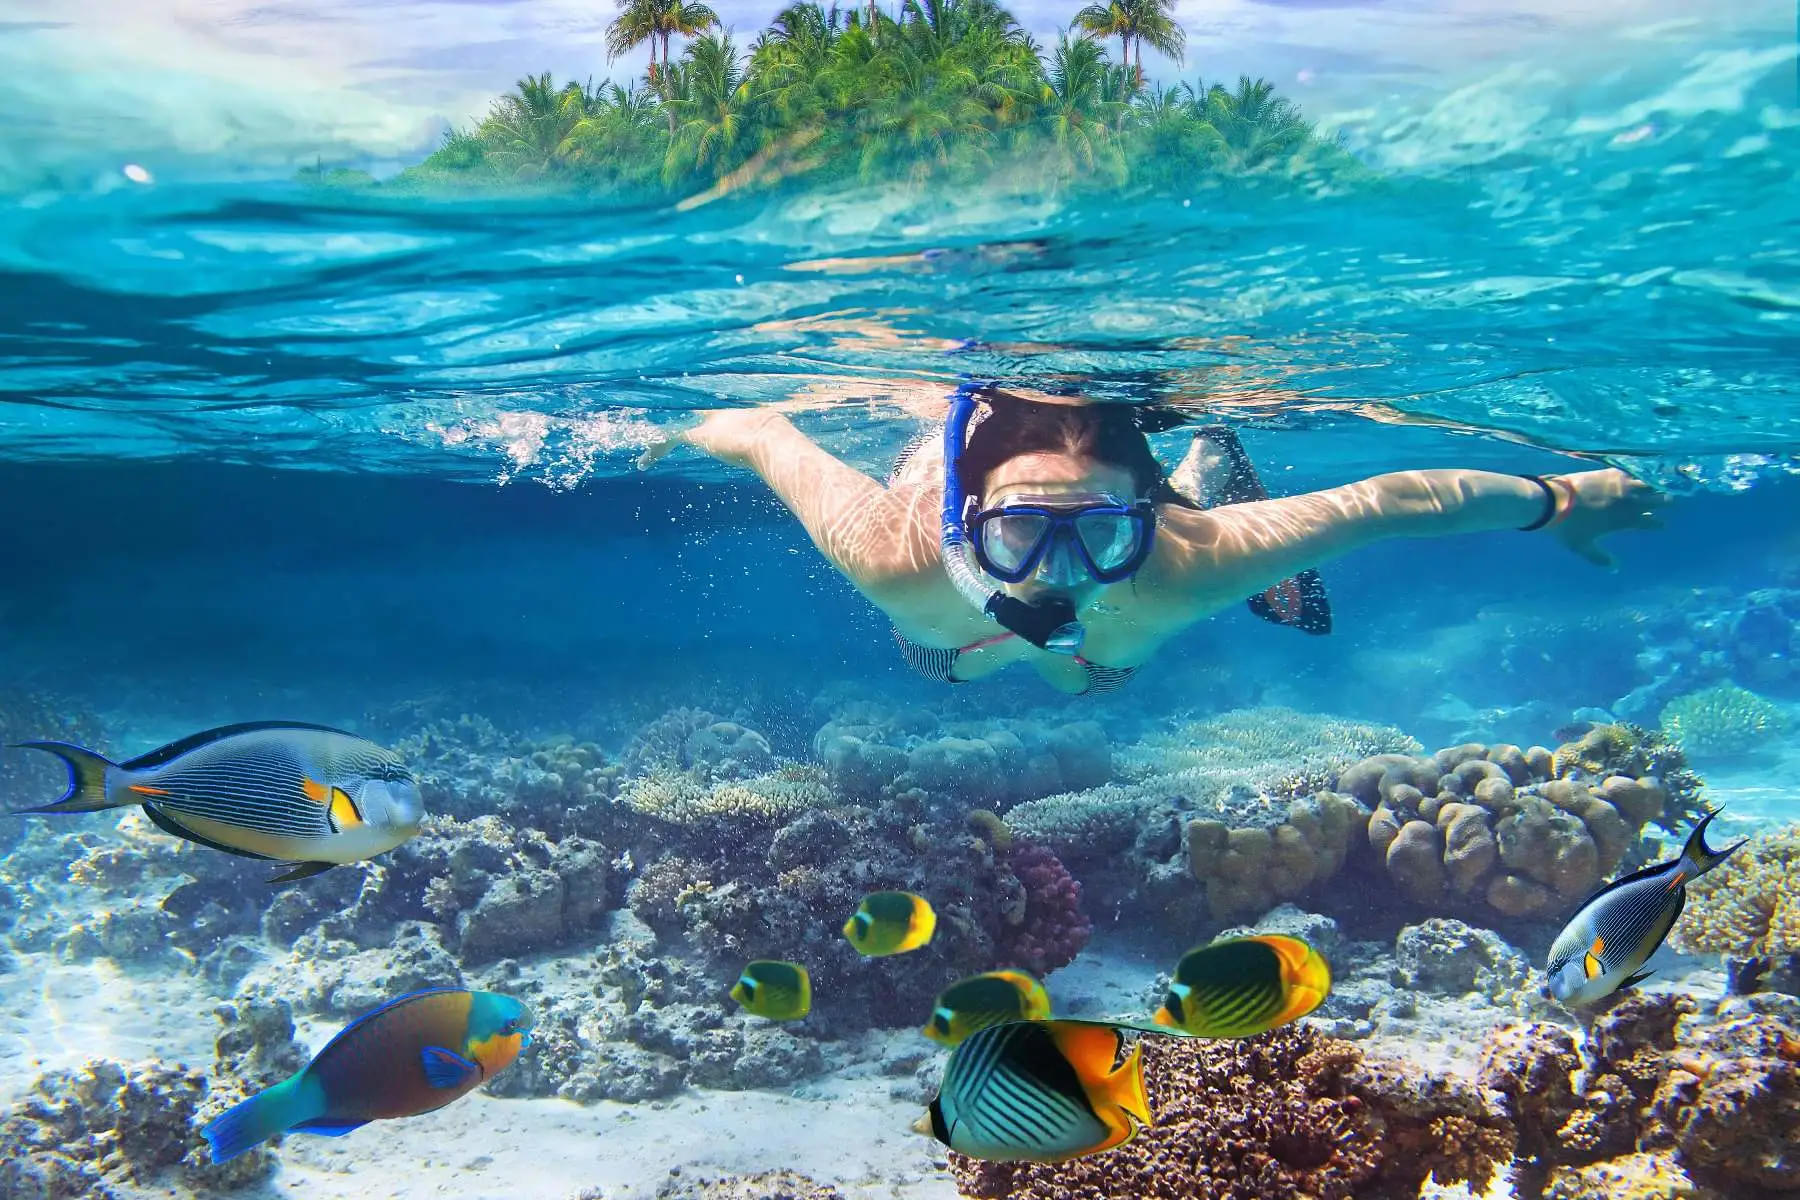 Indulge in a Snorkelling Adventure